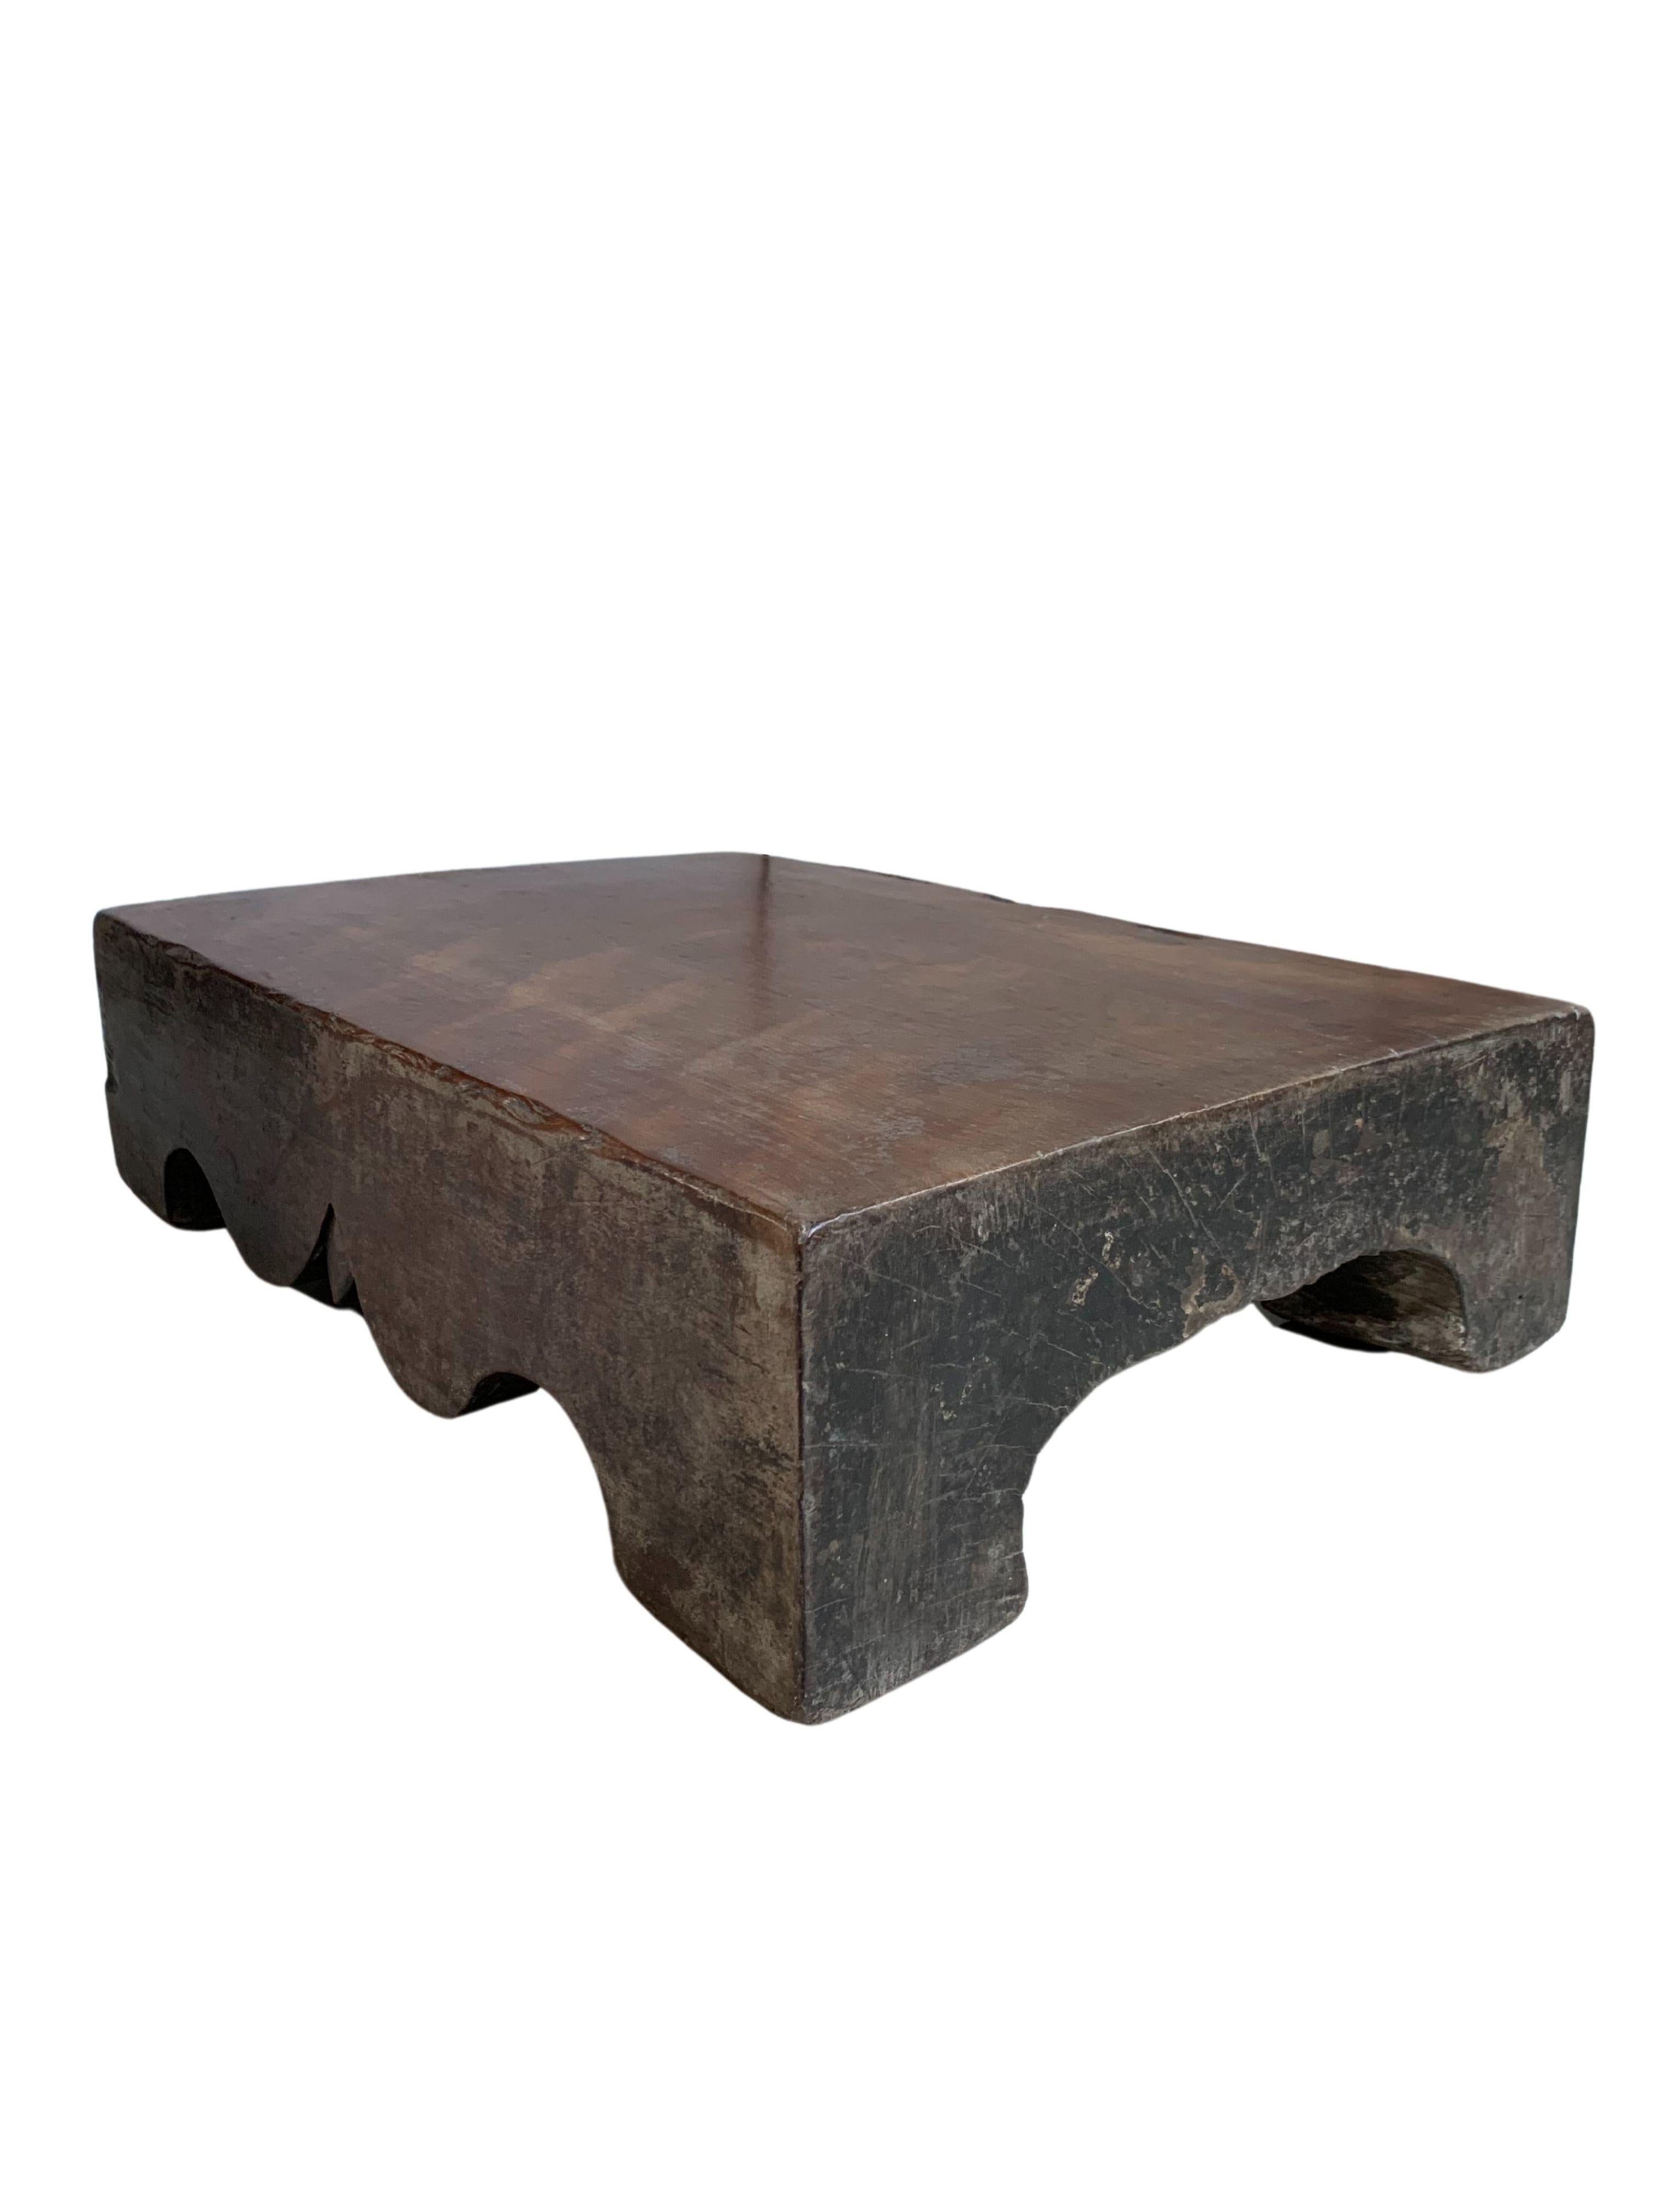 Antique Chinese Wooden Block / Chopping Block, Hand-Carved c. 1900 In Good Condition In Jimbaran, Bali